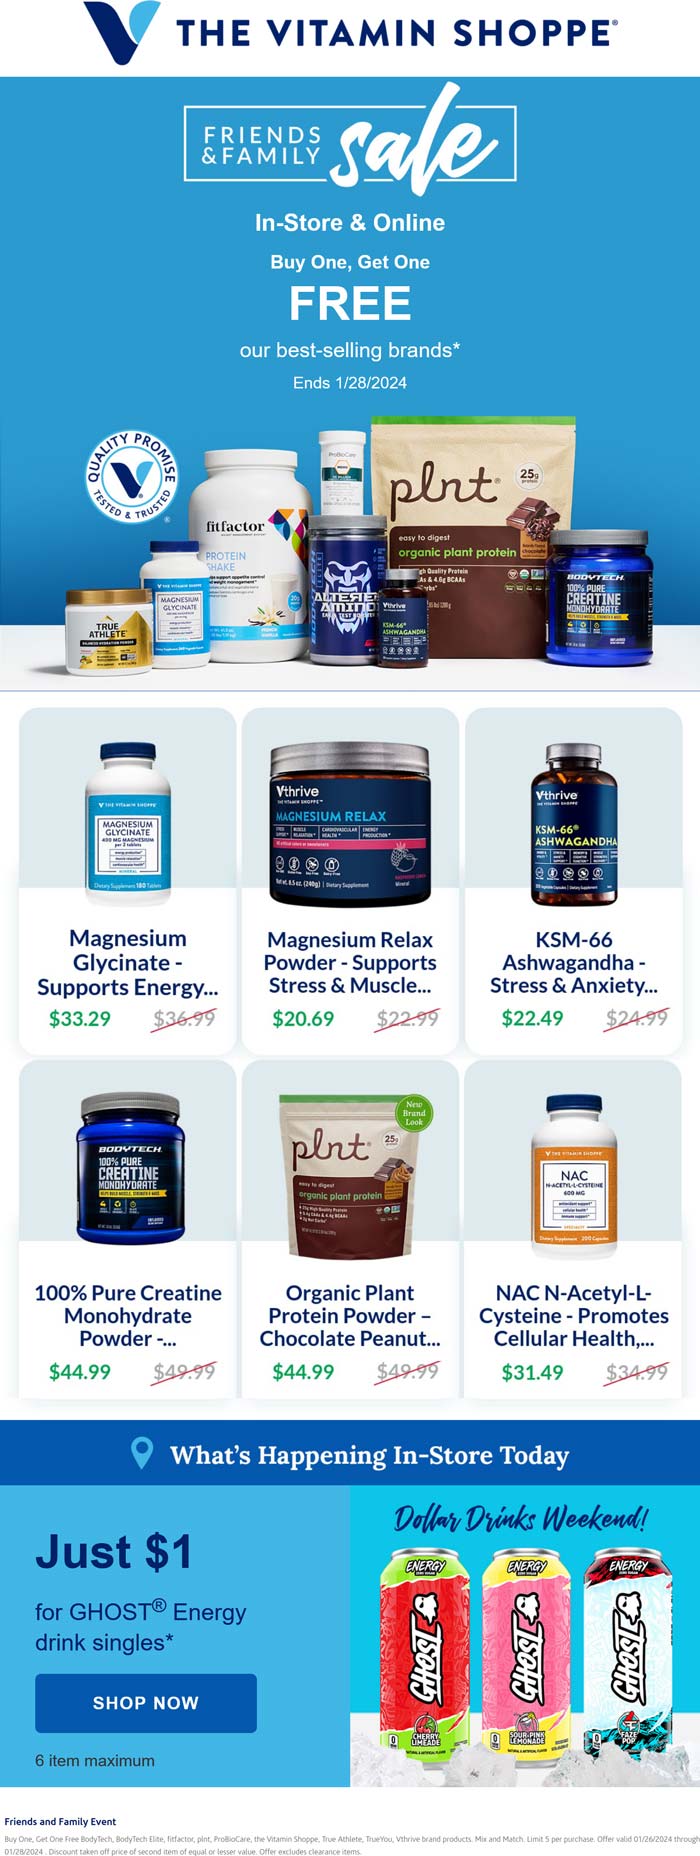 Second best seller free at The Vitamin Shoppe, ditto online #thevitaminshoppe